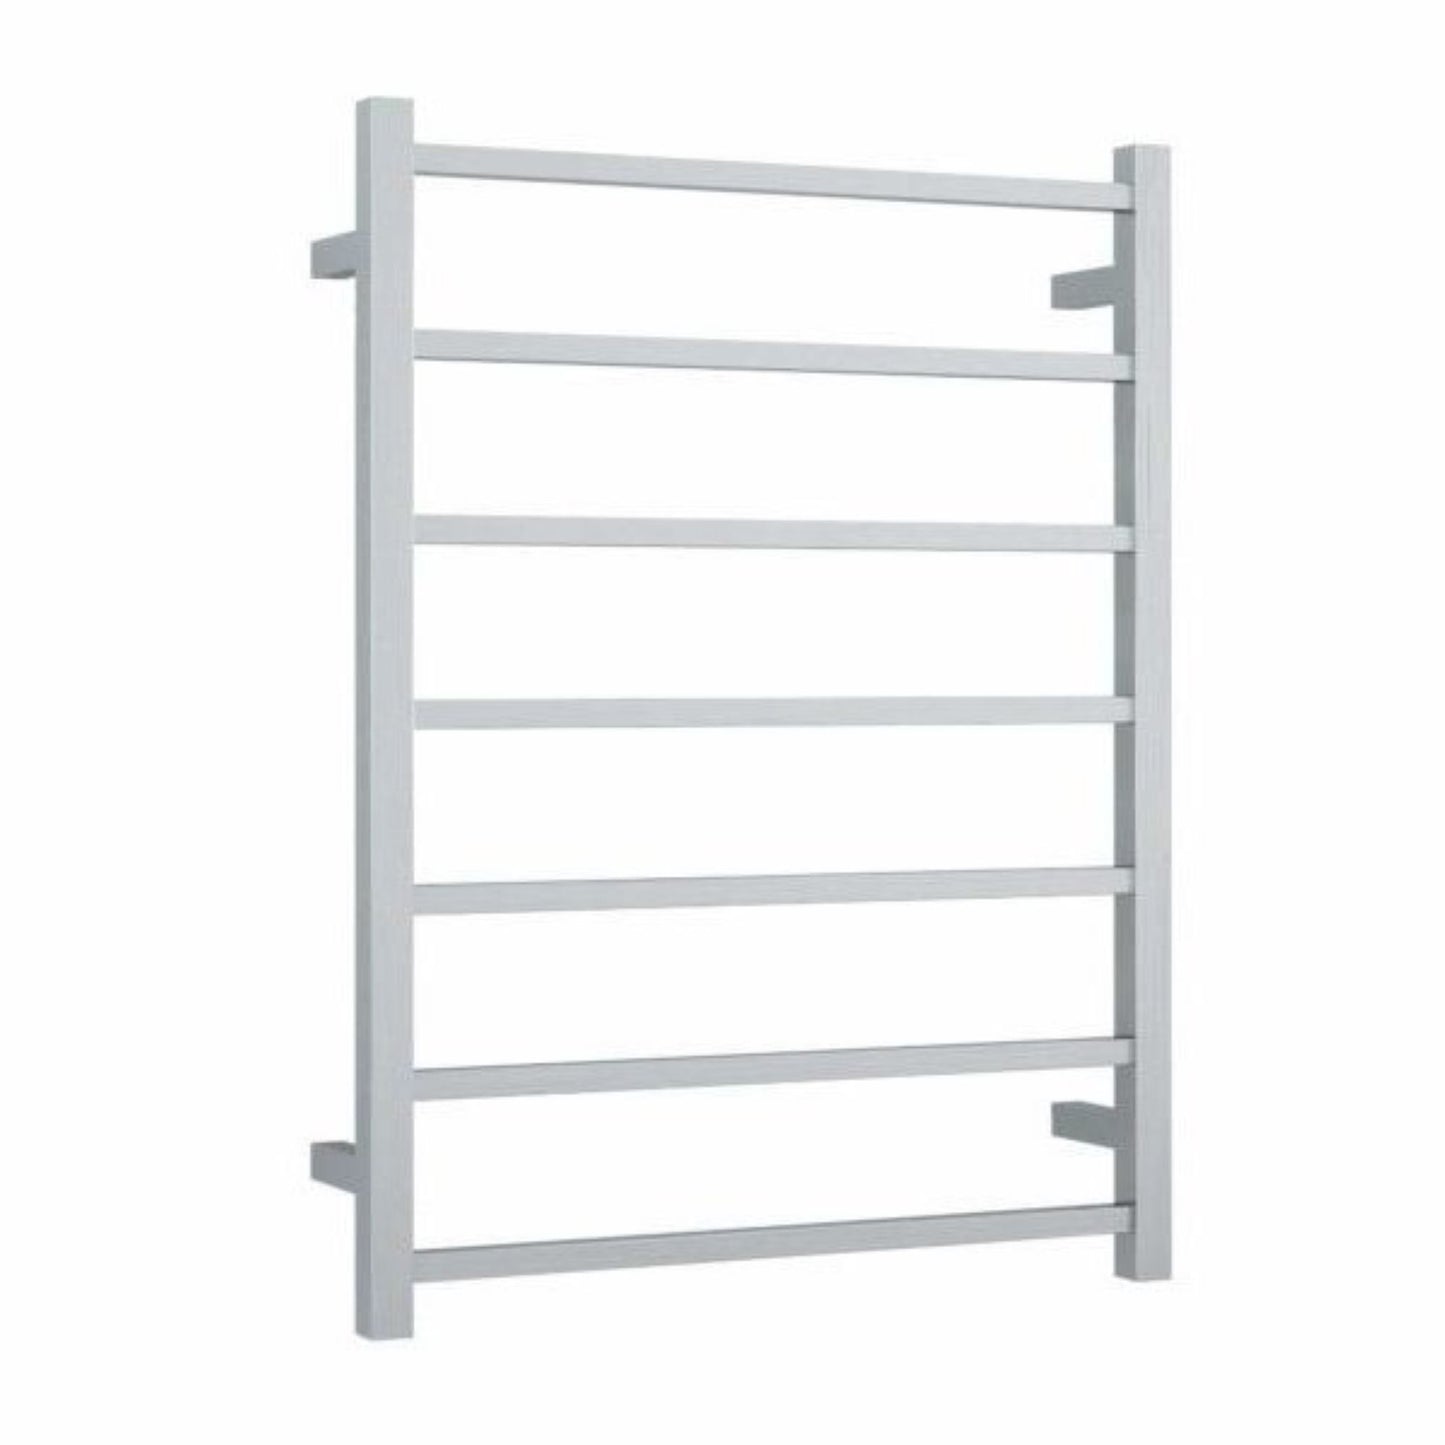 THERMORAIL - SSB44M Straight Square Ladder Heated Towel Rail Brushed